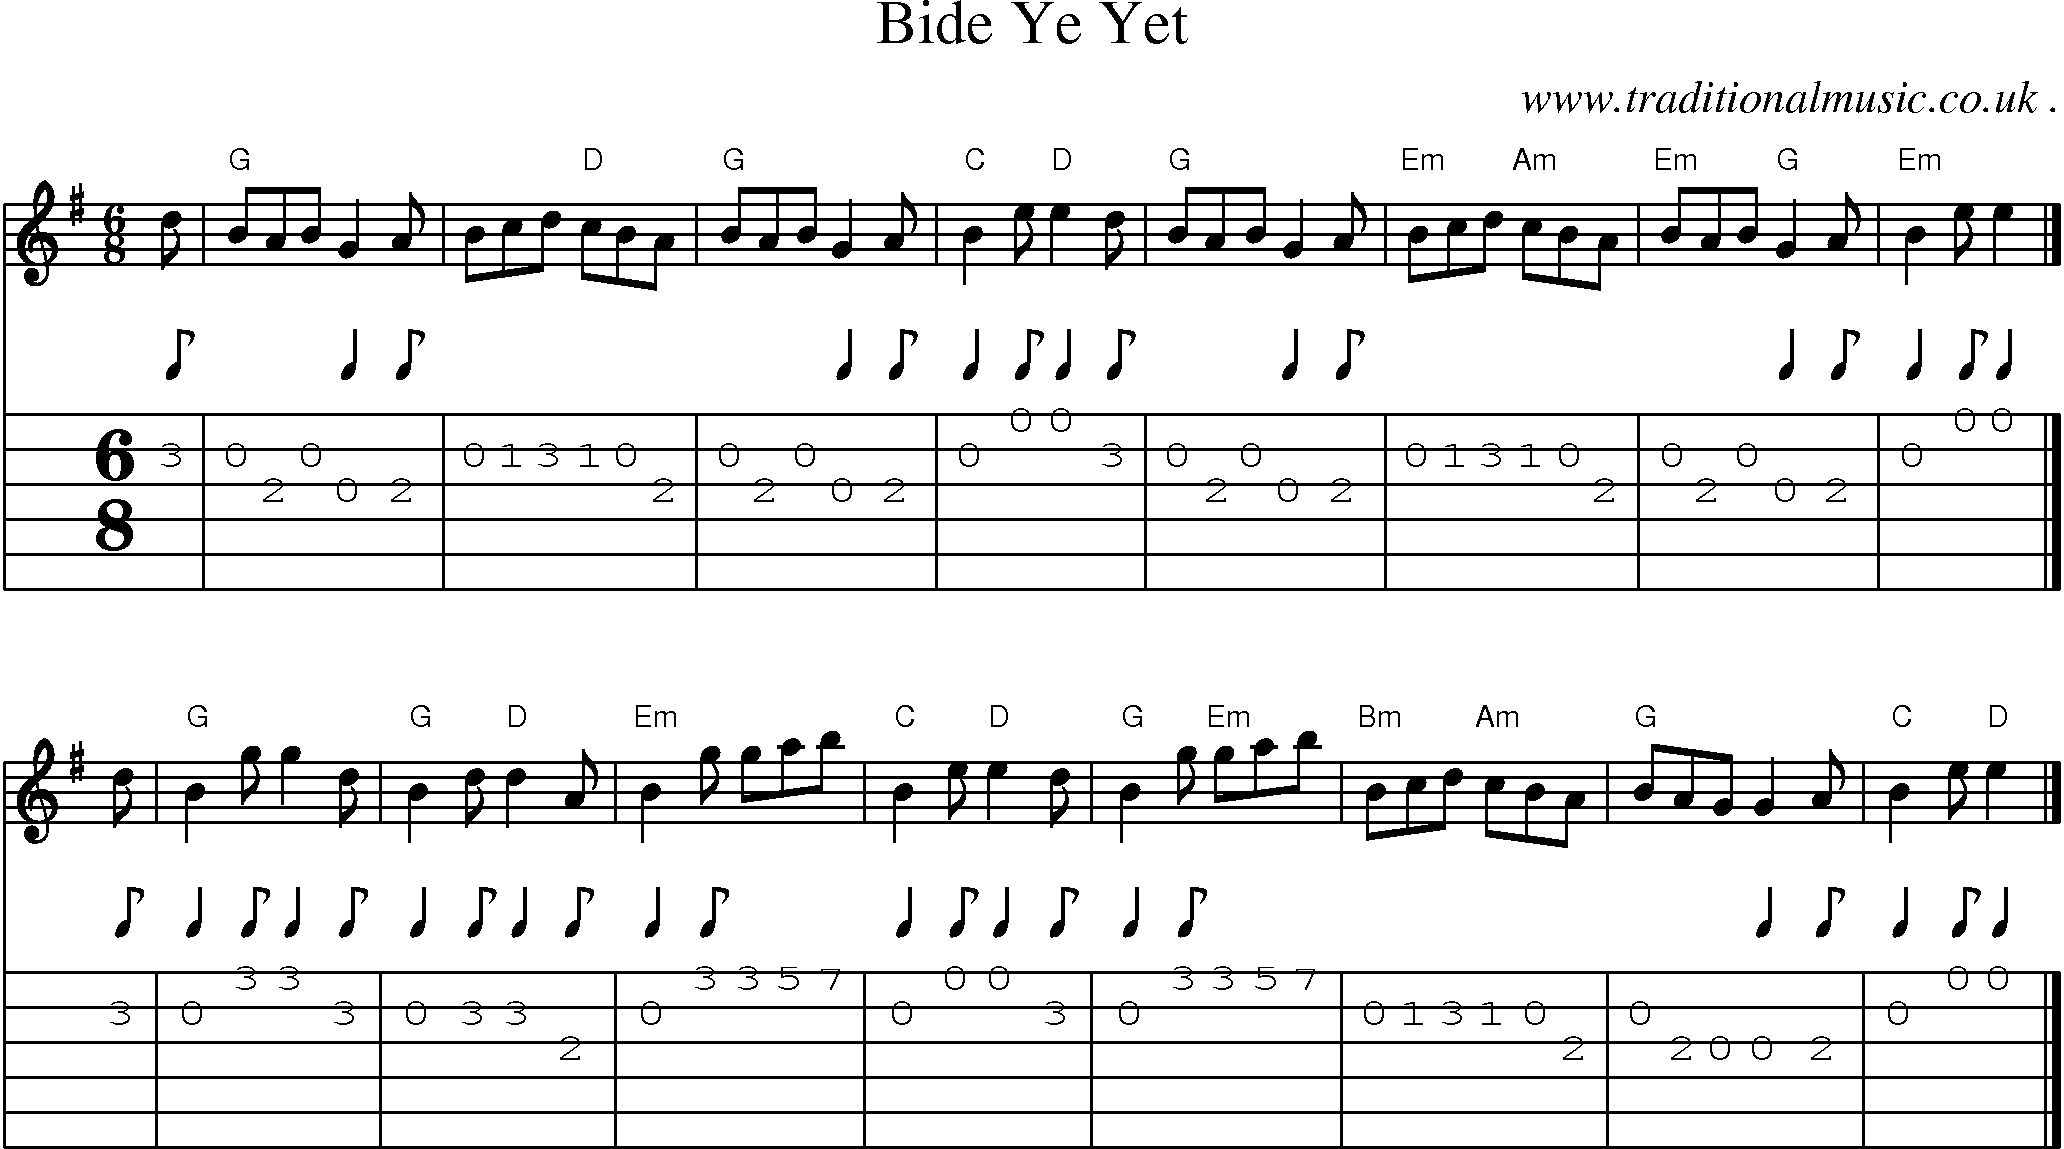 Sheet-music  score, Chords and Guitar Tabs for Bide Ye Yet